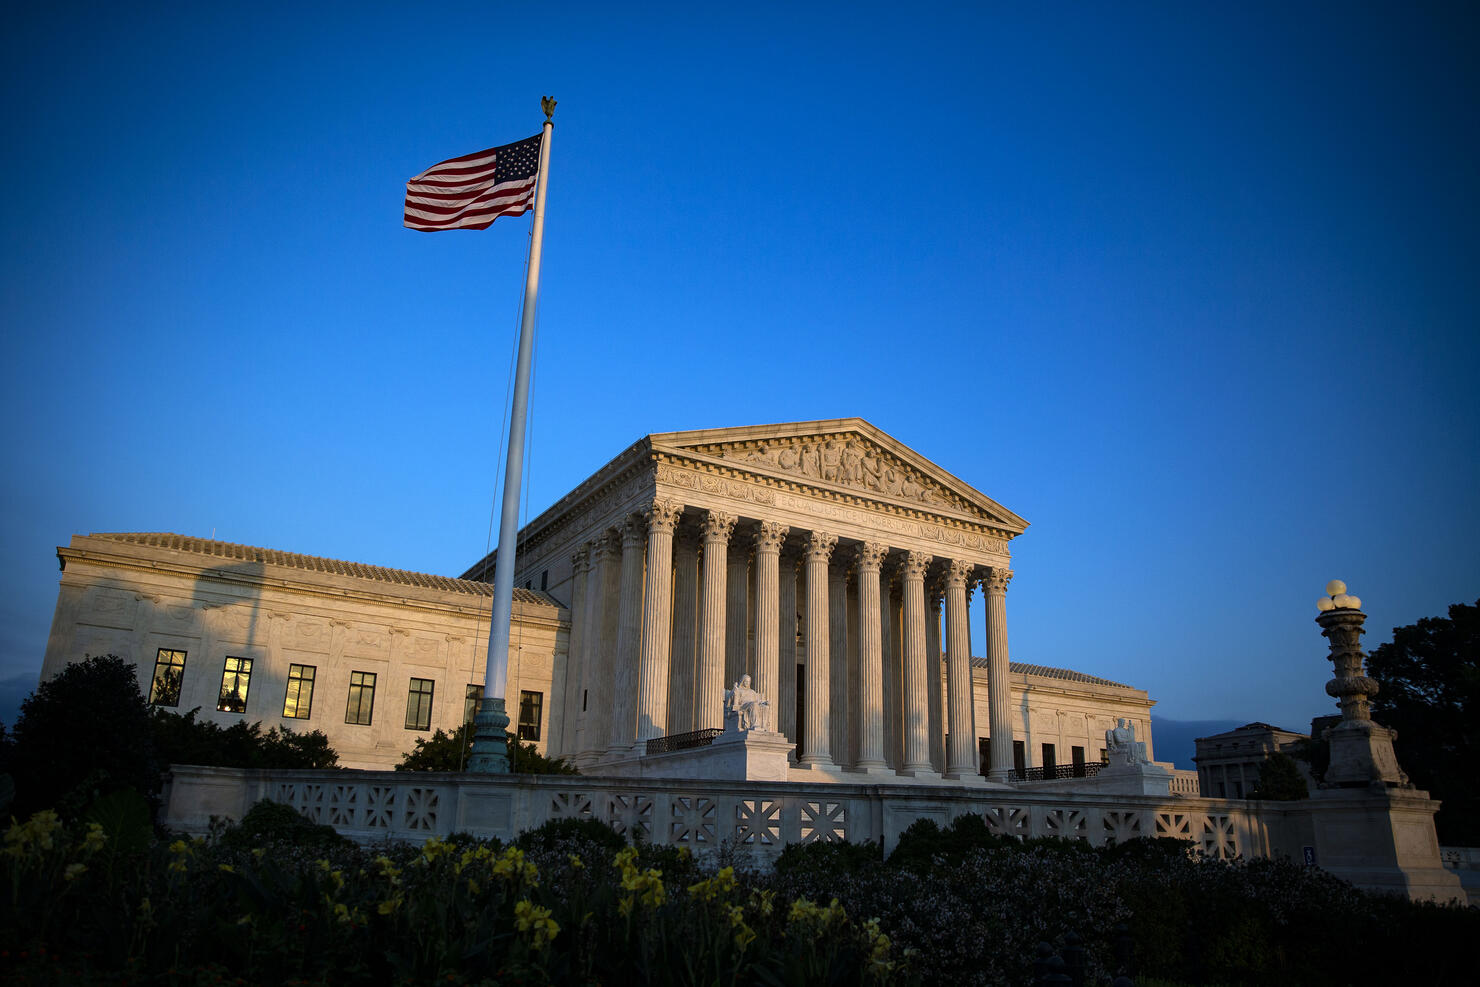 The U.S. Supreme Court building stands in Washington